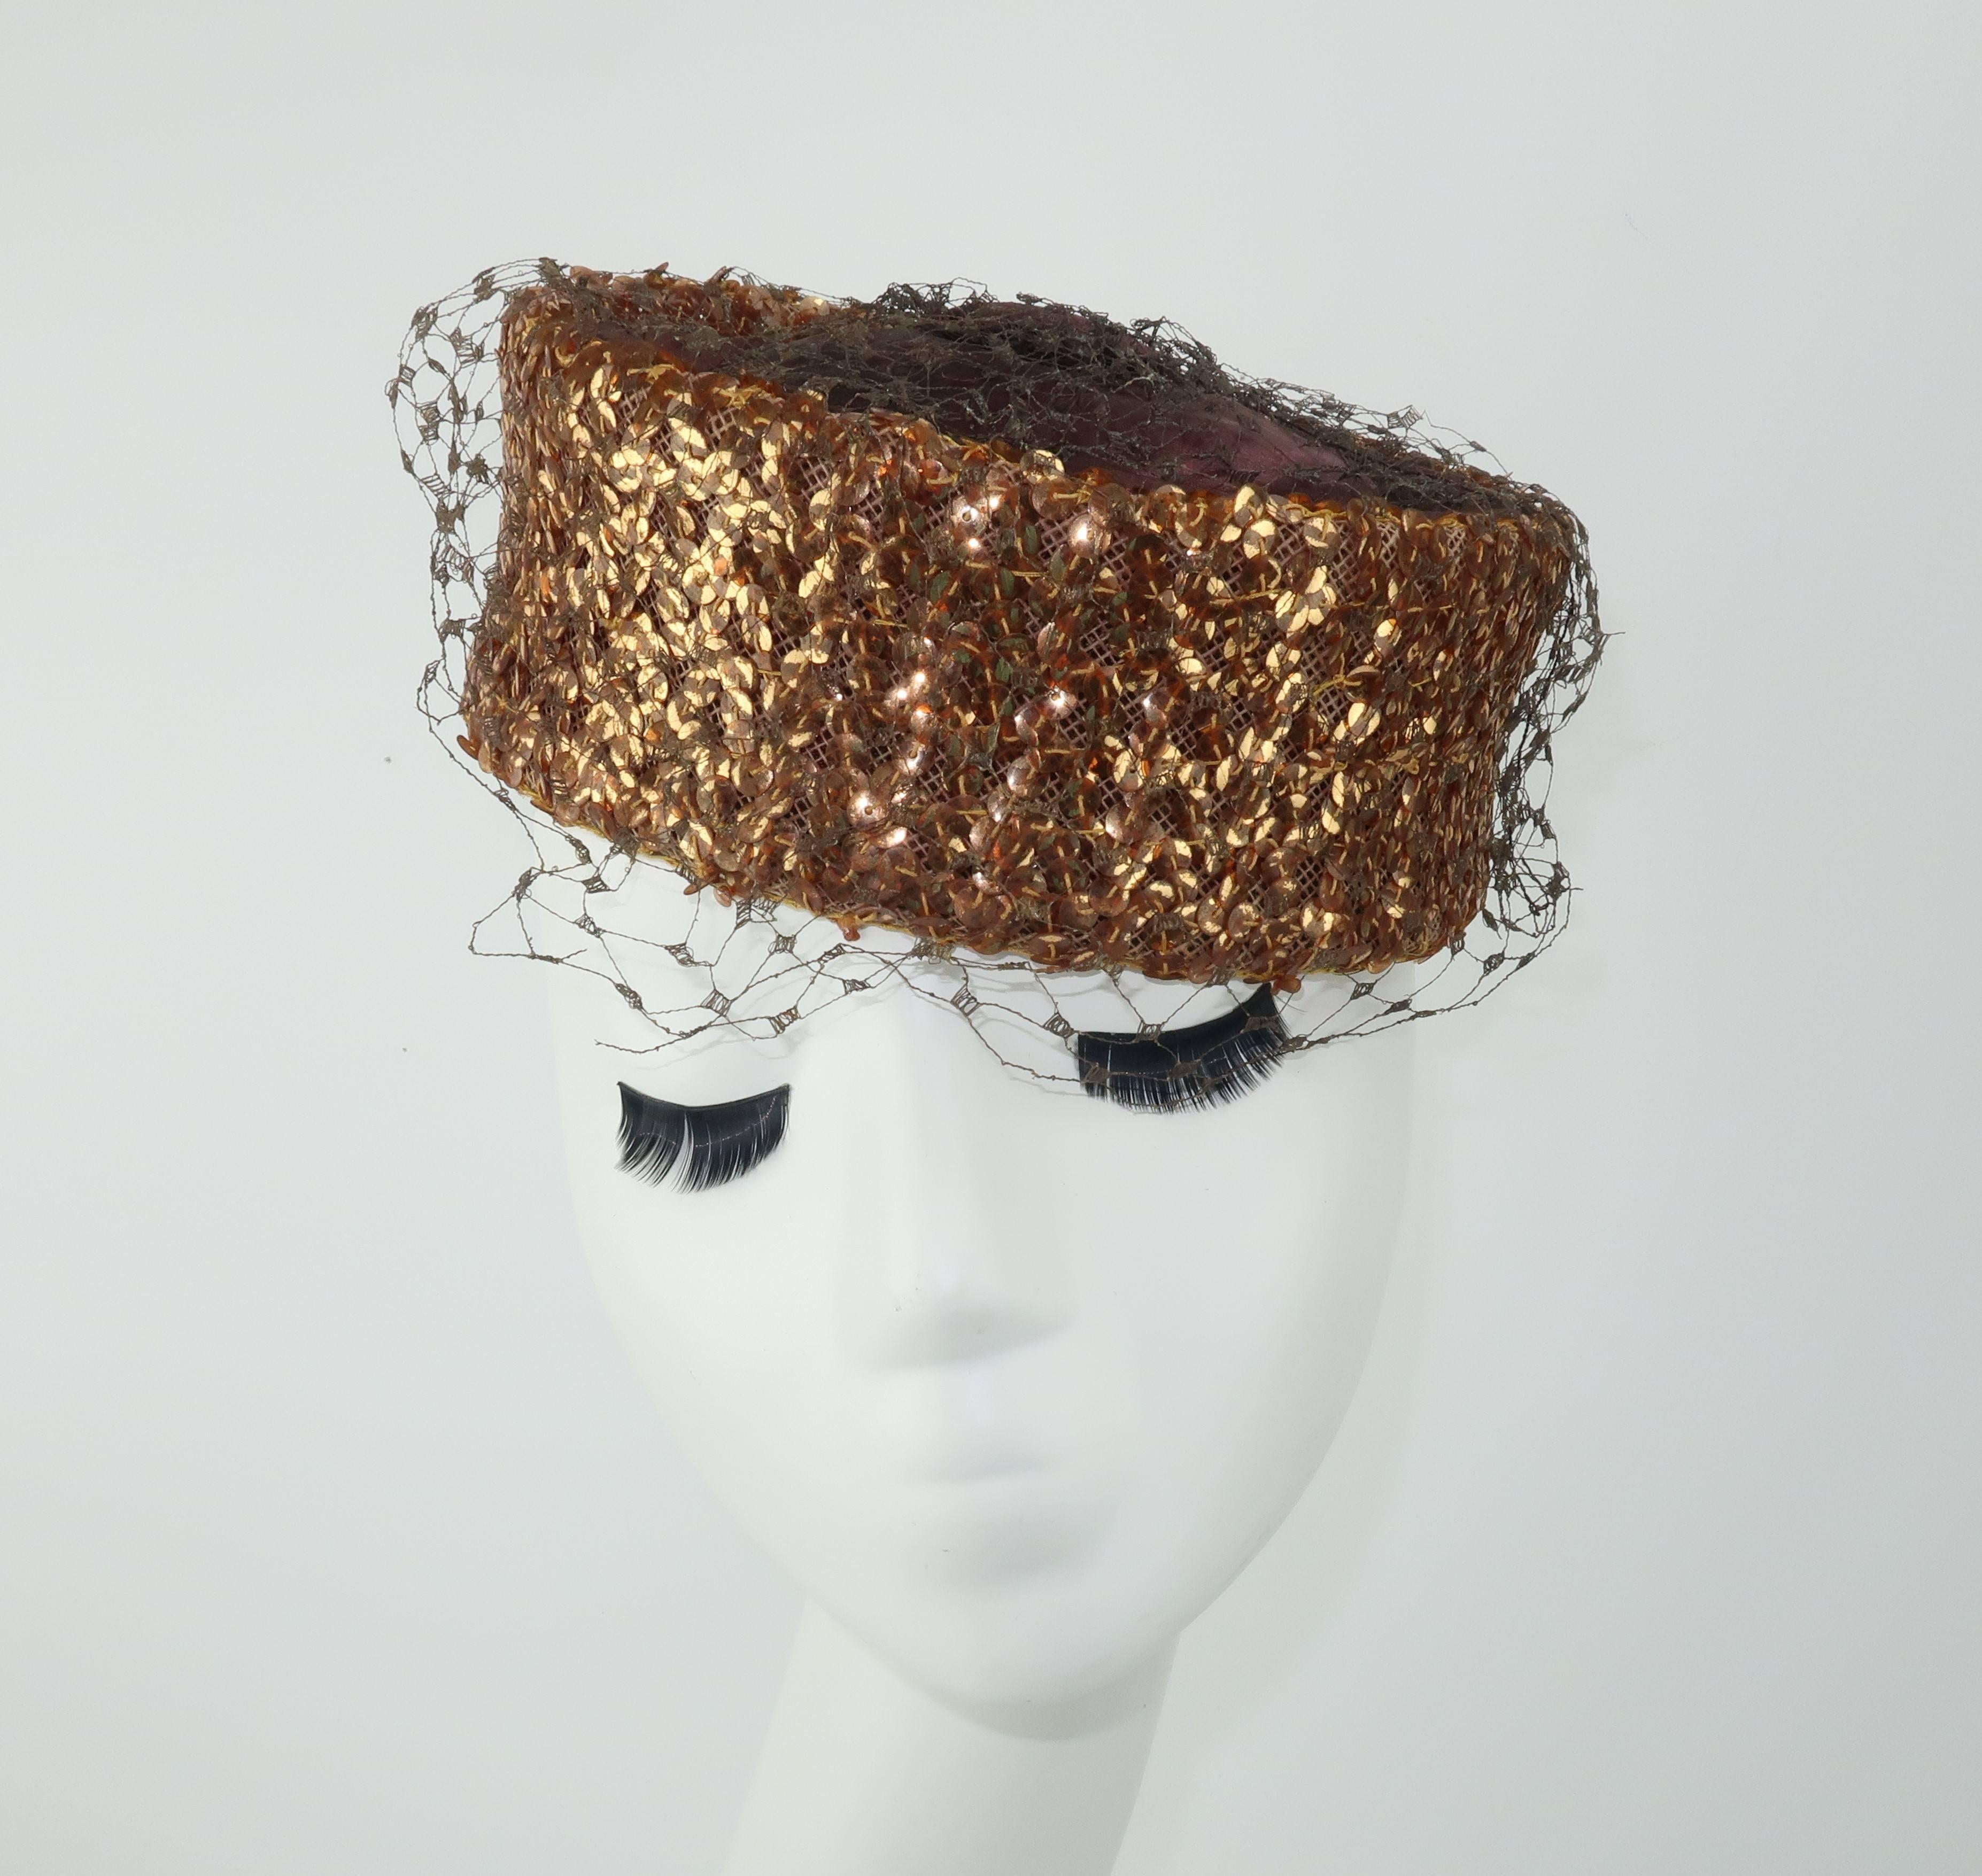 A glamorous topper is a fun way to add a vintage accessory to a modern day ensemble.  This classic brown satin pillbox hat is heavily embellished with copper sequins that catch the light in a dazzling way.  The button crown anchors a brown net and